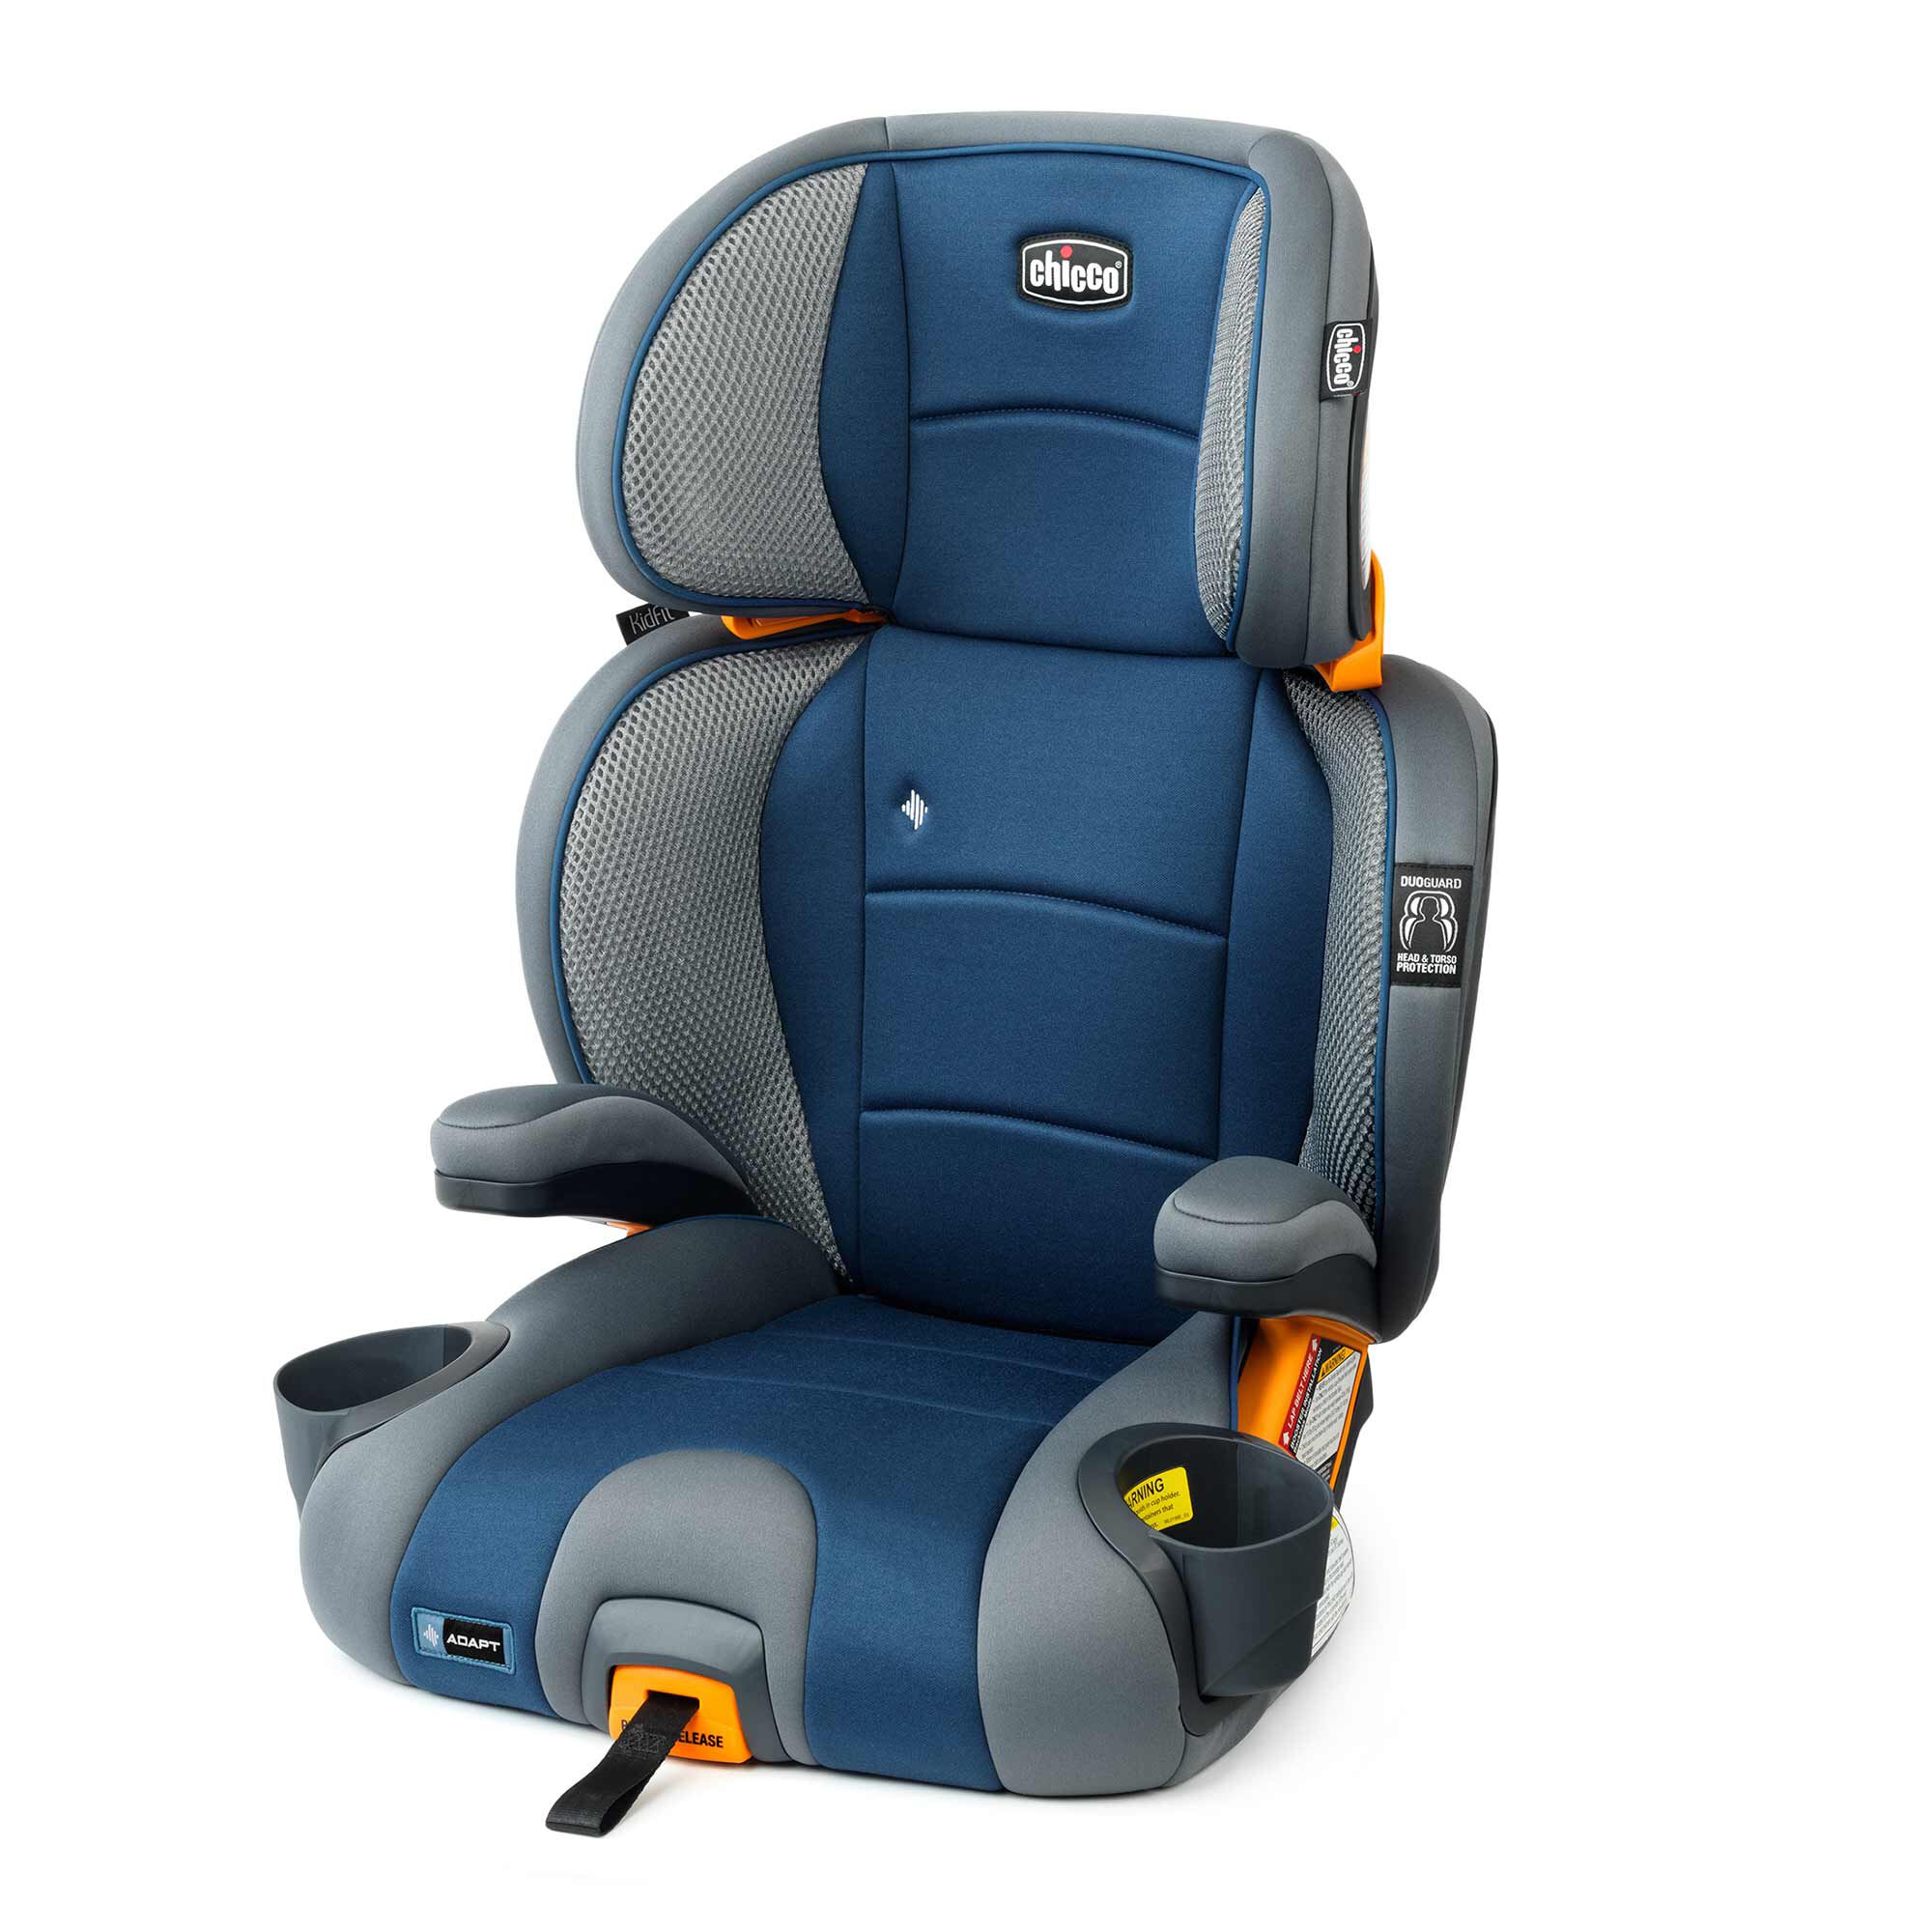 https://www.chiccousa.com/dw/image/v2/AAMT_PRD/on/demandware.static/-/Sites-chicco_catalog/default/dw437c4bcc/images/products/Gear/kidfit/chicco-kidfit-adapt-plus-car-seat-vapor.jpg?sw=2000&sh=2000&sm=fit